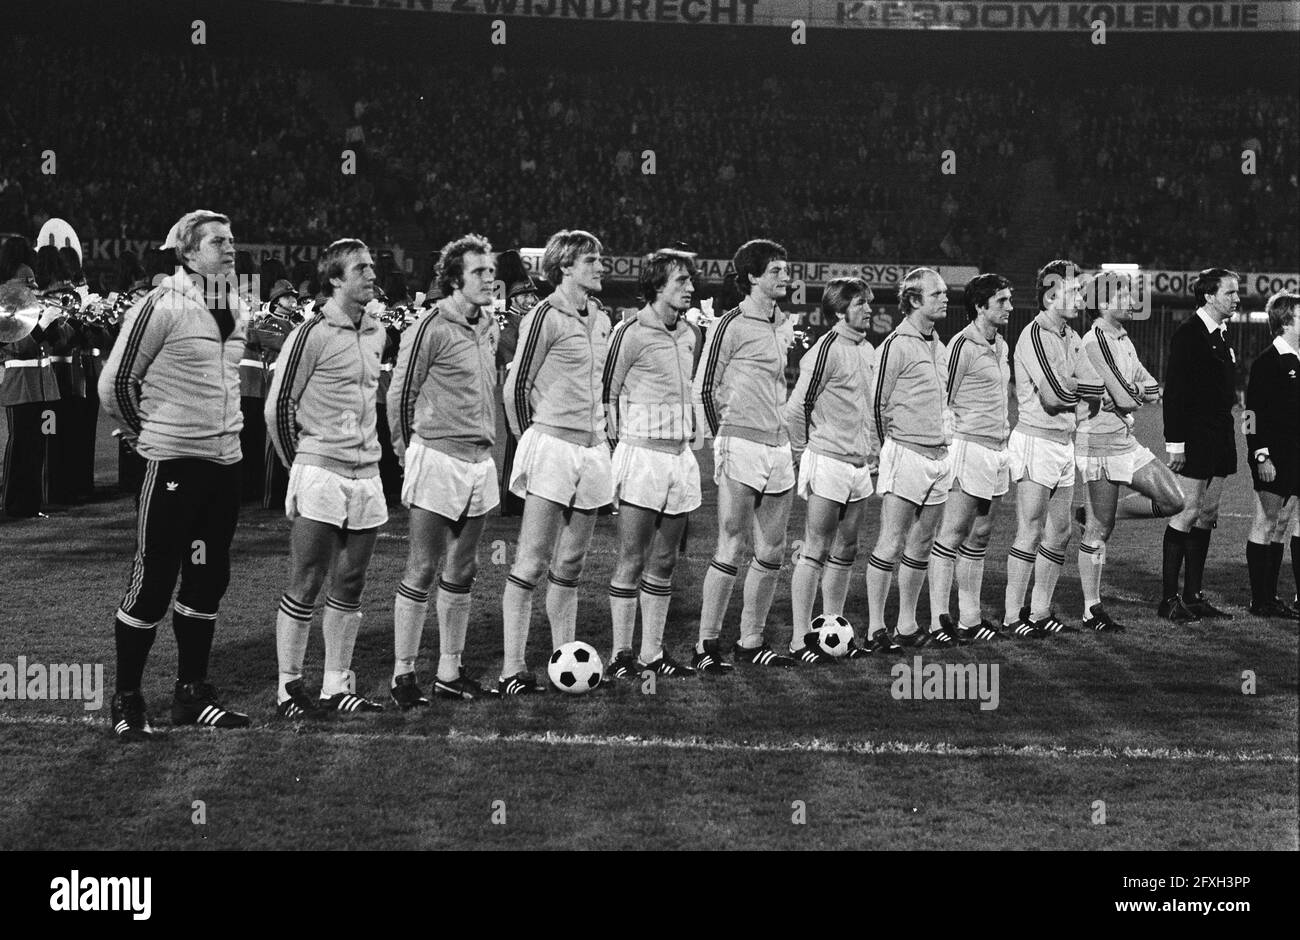 Soccer Netherlands against DDR 3-0, group photo Dutch national team, no. 7  group photo Dutch national team in addition to national team DDR, November  15, 1978, teams, sports, soccer, The Netherlands, 20th